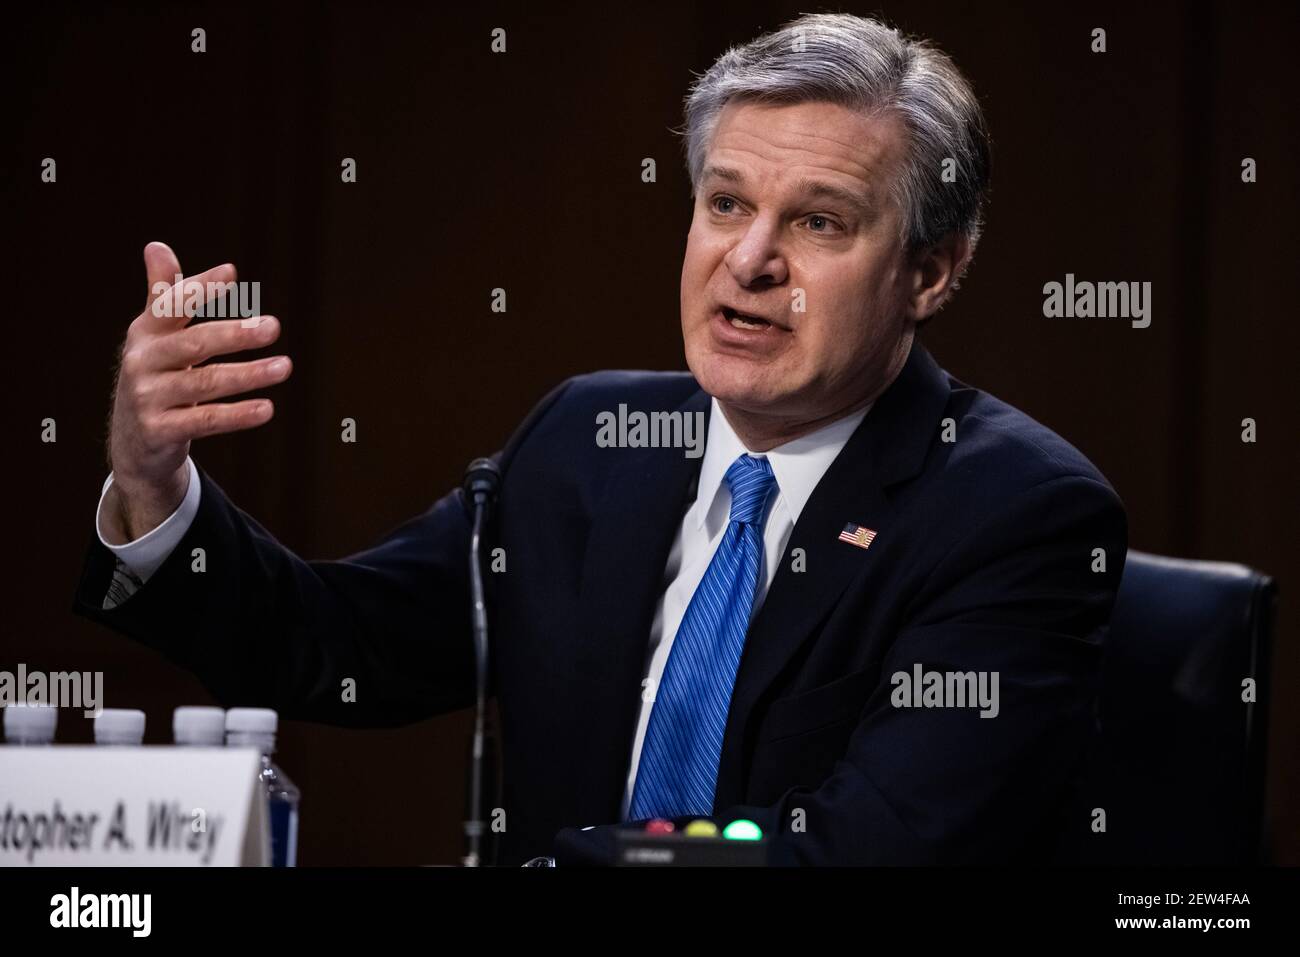 Federal Bureau of Investigation Director Christopher Wray testifies on Capitol Hill, in Washington, before a Senate Judiciary Committee on the the January 6th Insurrection, domestic terrorism and other threats, Tuesday, March 2, 2021.Credit: Graeme Jennings/Pool via CNP /MediaPunch Stock Photo